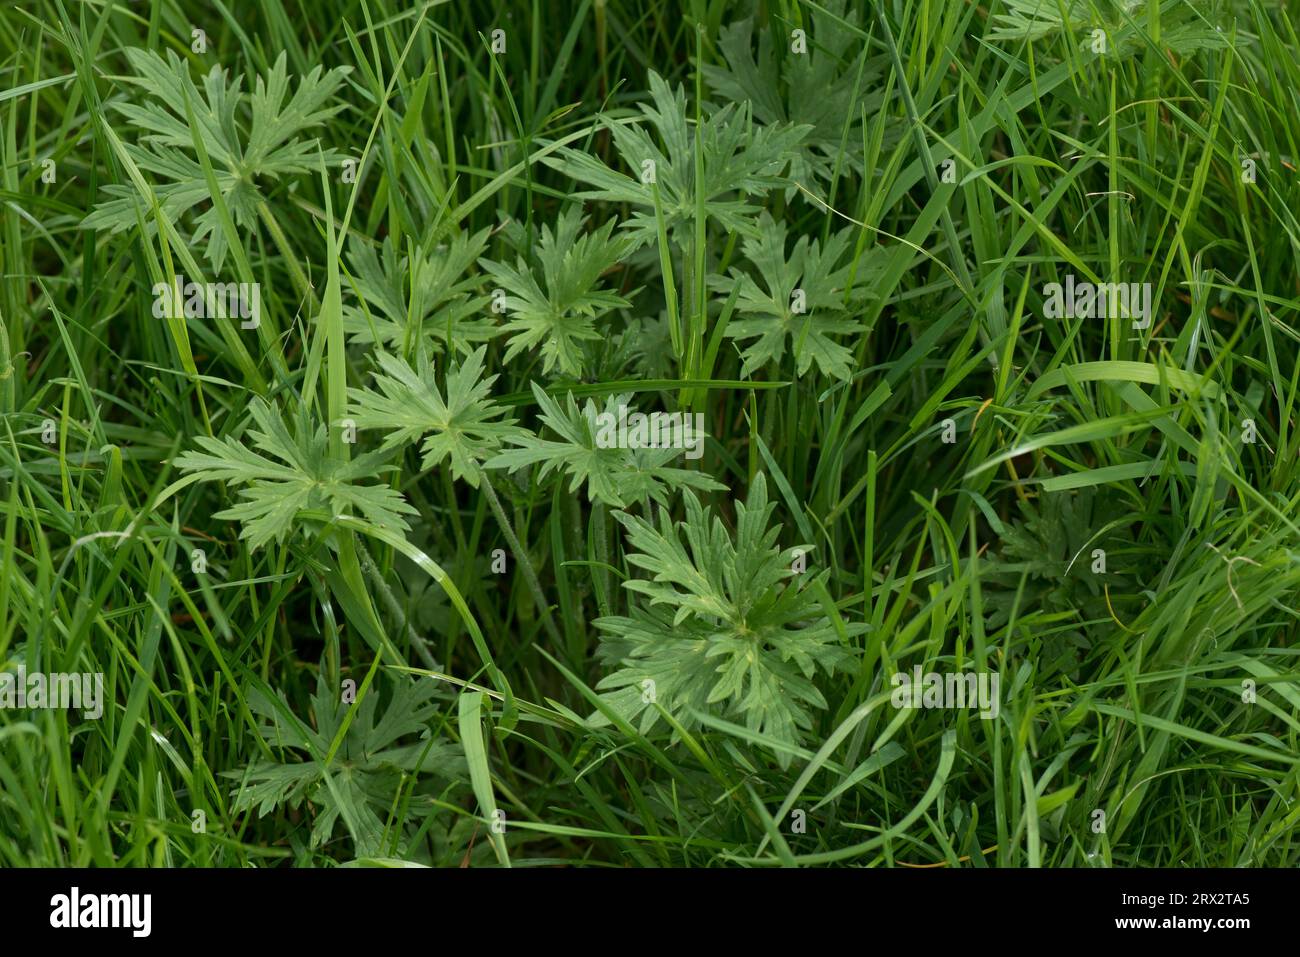 Meadow, common or tall buttercup (Ranunculus acris) leaves of plant in old pasture grass before flowering, Berkshire, May Stock Photo